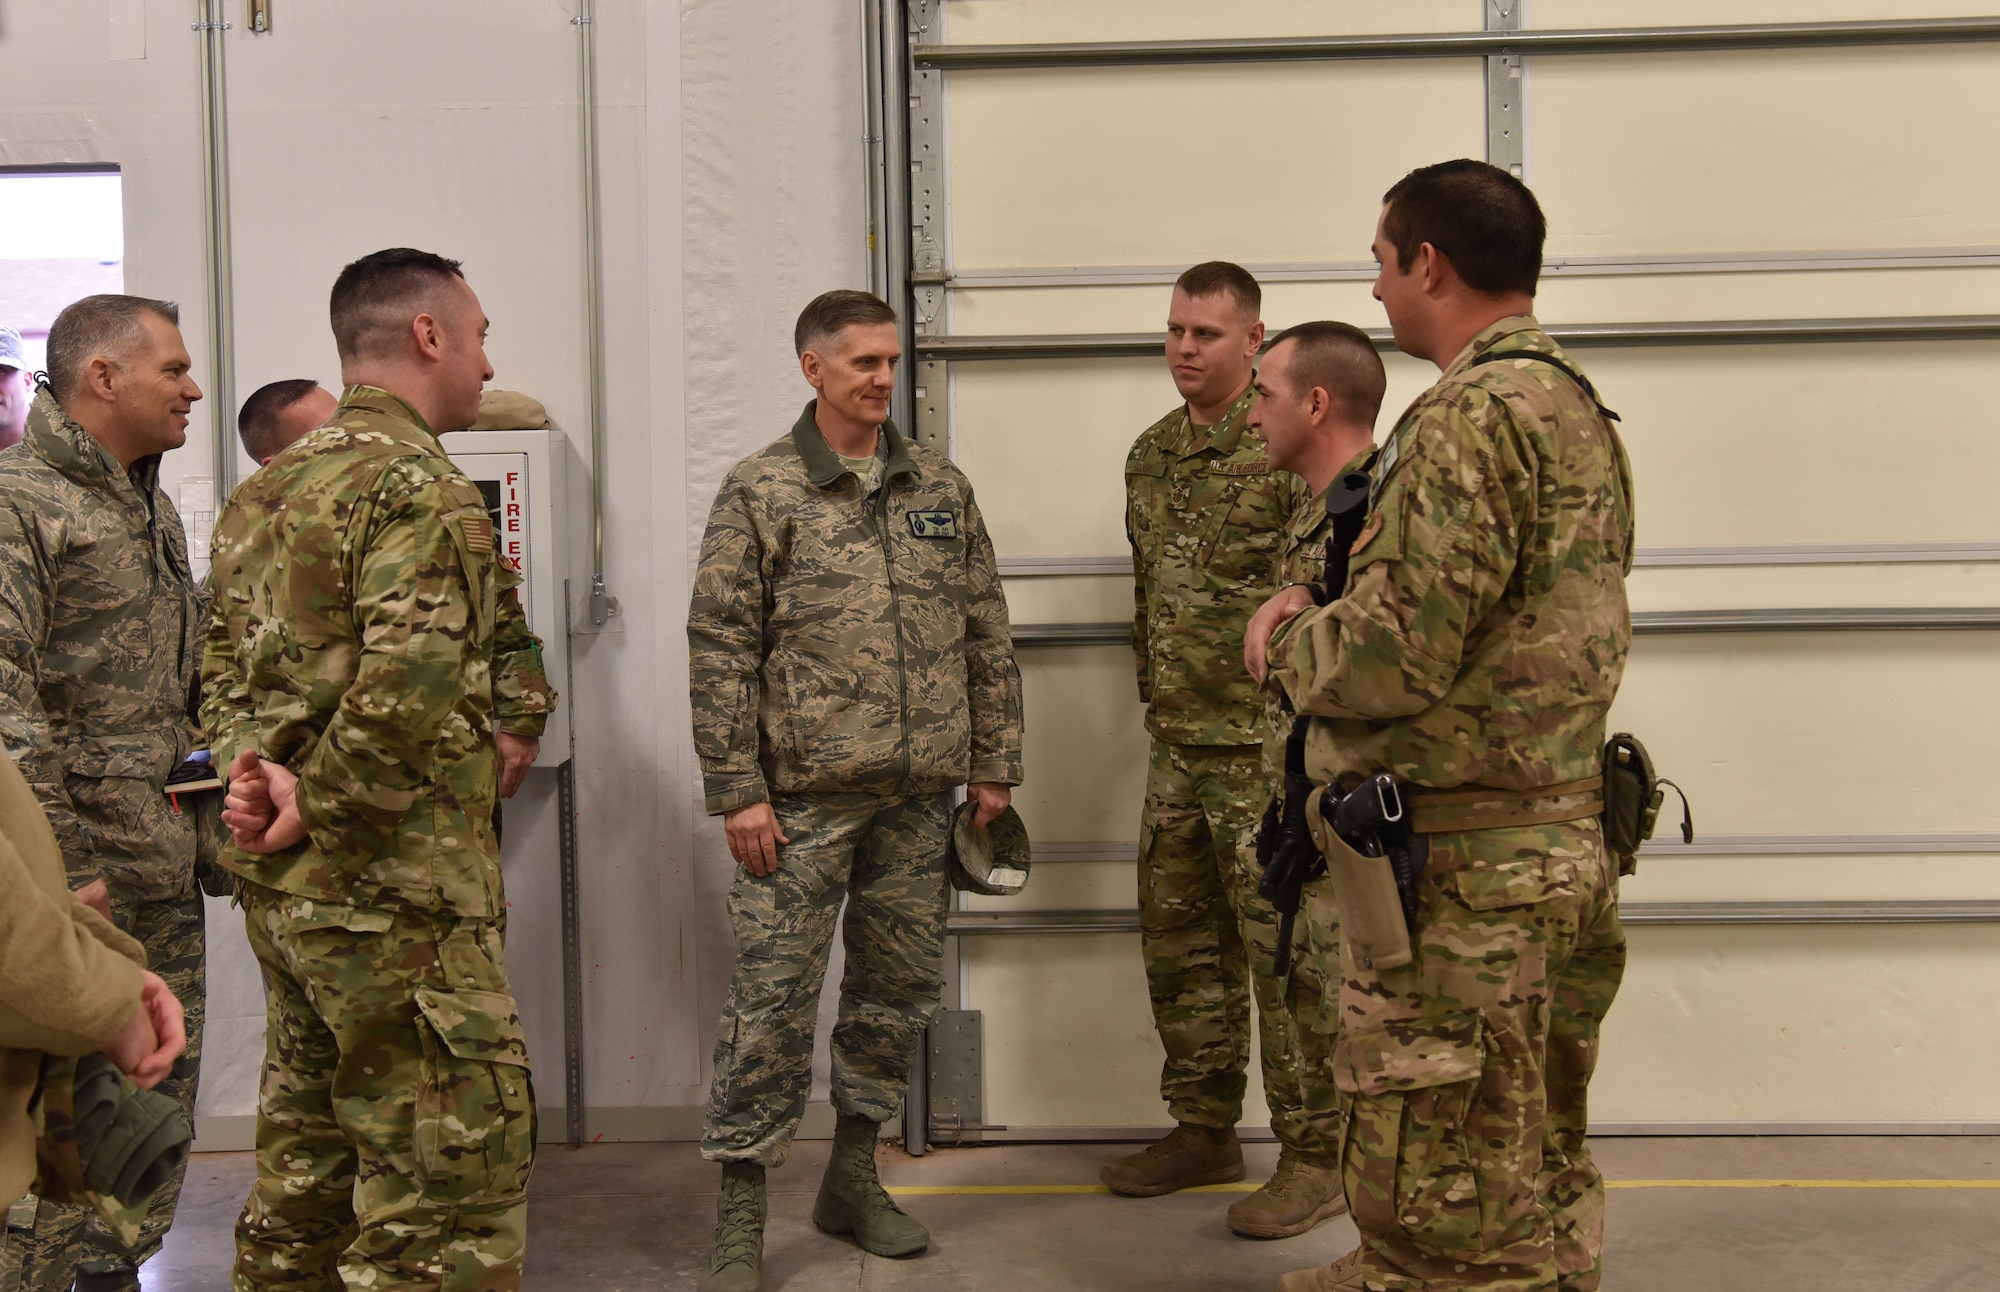 U.S. Air Force Gen. Timothy Ray, Air Force Global Strike Command commander, visits with Airmen and receives a briefing on security forces combatives at Camp Guernsey Joint Training Center, Wyo., Dec. 12, 2018. During the visit, Ray also received a mission brief covering Camp Guernsey’s role in mission execution, and the newest training tactics used by Airmen to sustain high performance in demanding mission sets. (U.S. Air Force photo by Airman 1st Class Braydon Williams)